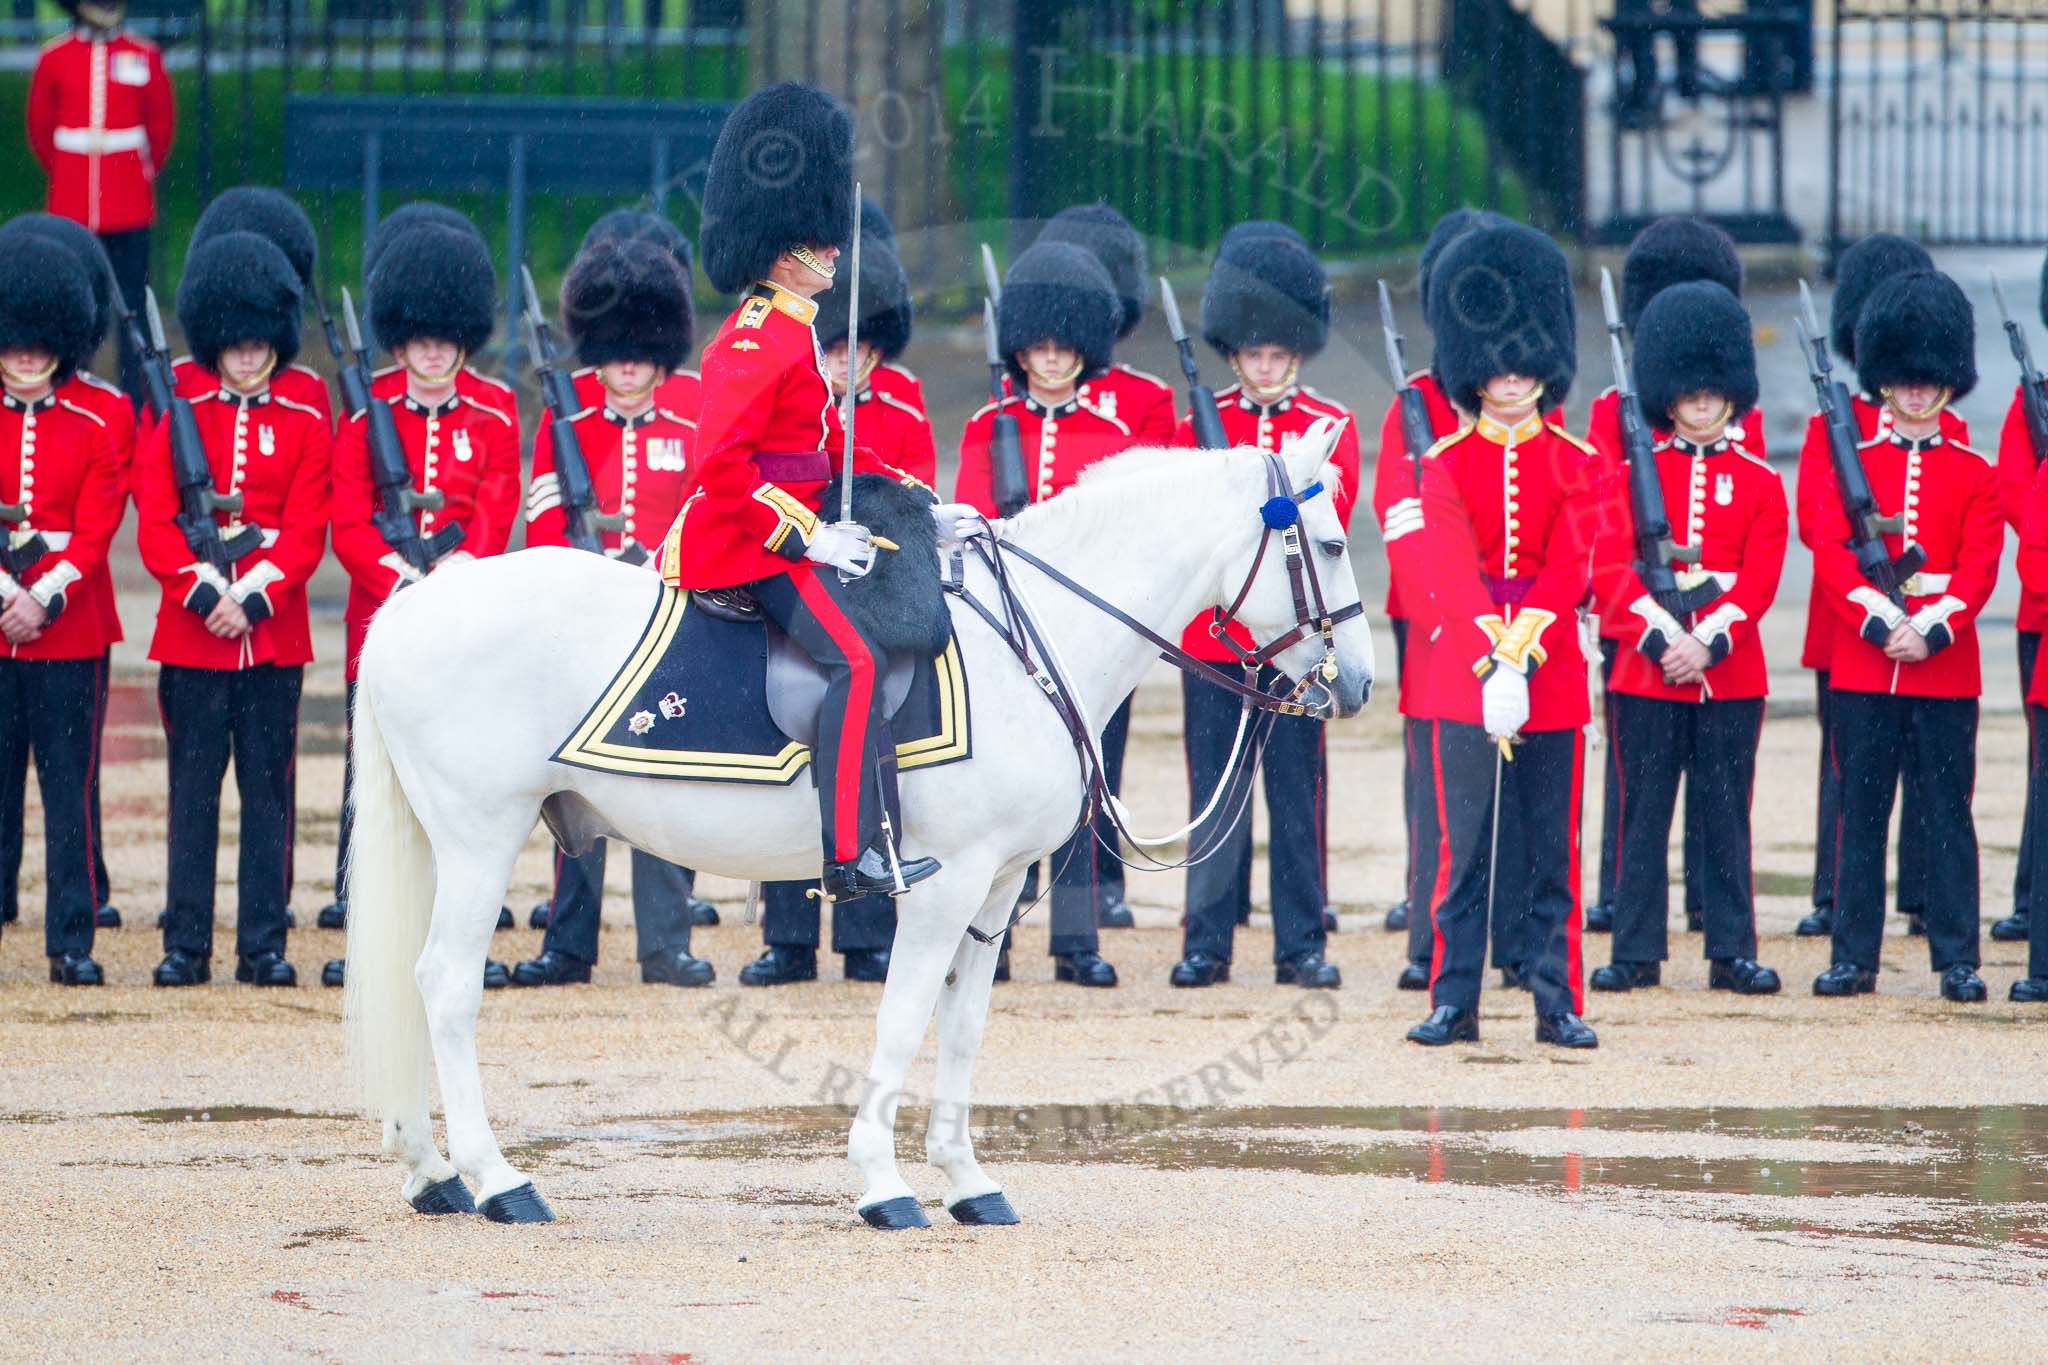 The Colonel's Review 2014.
Horse Guards Parade, Westminster,
London,

United Kingdom,
on 07 June 2014 at 10:41, image #172